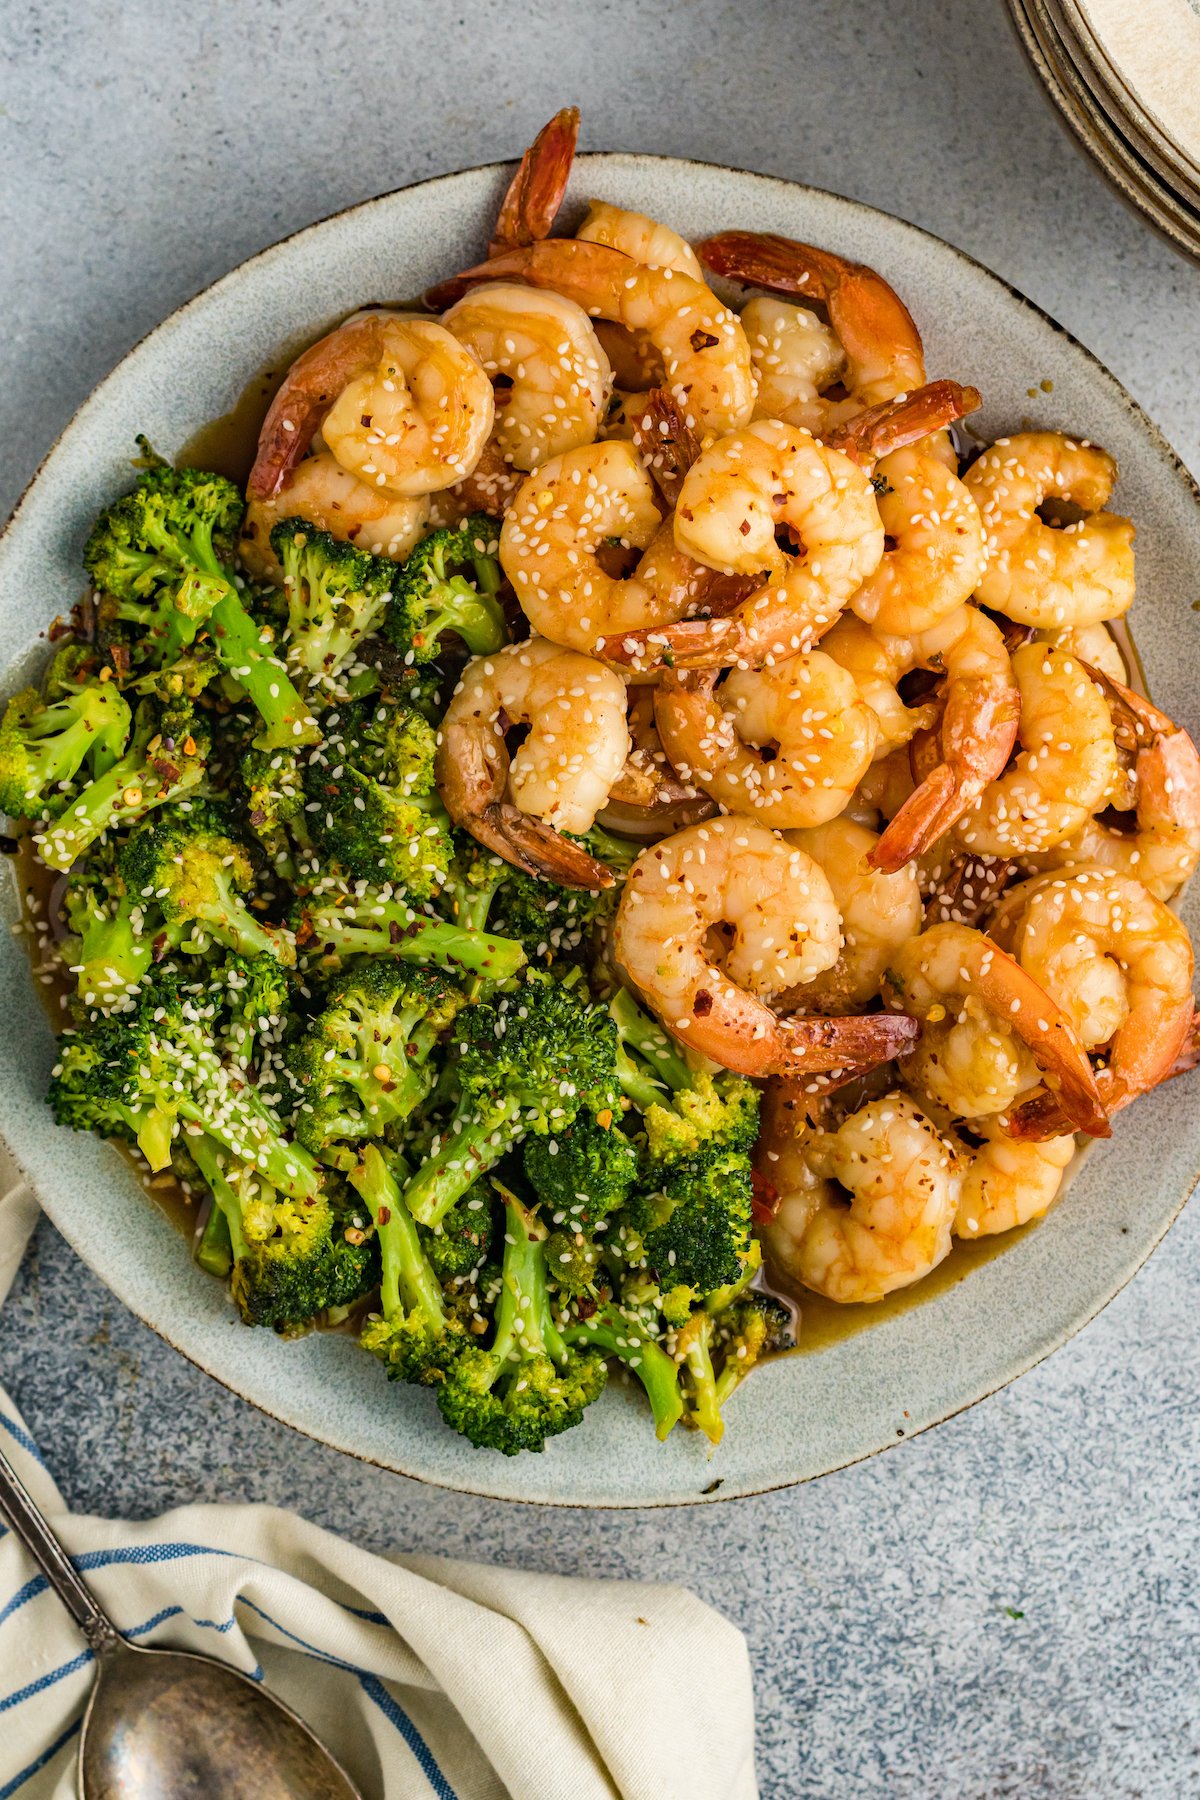 Overhead view of a dining plate that's half filled with cooked shrimp and the other half broccoli florets.